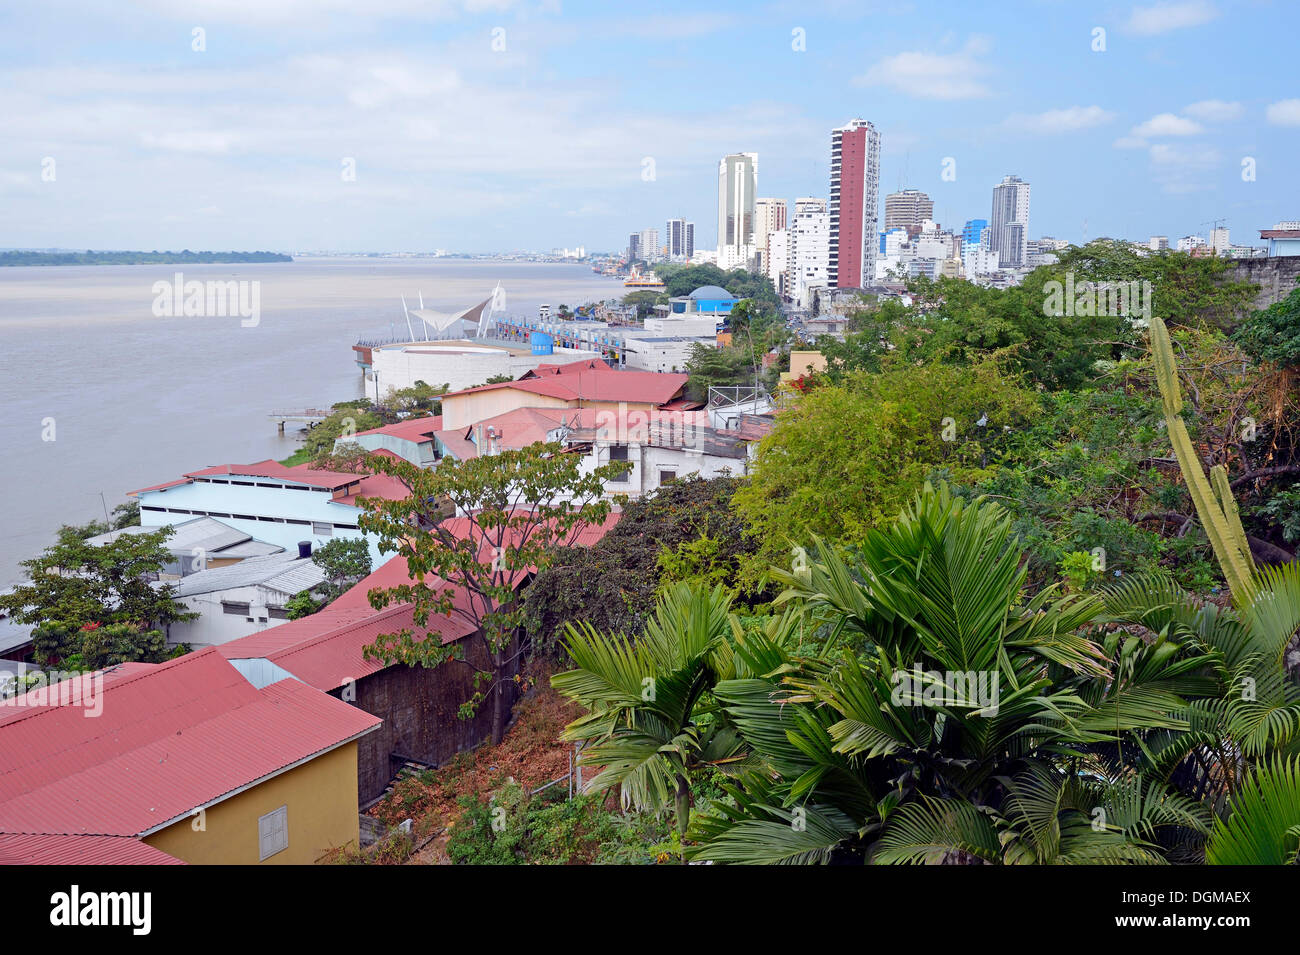 Overlooking the waterfront promenade at Malecon Park on the banks of the Rio Guayas River, Guayaquil, Ecuador, South America Stock Photo